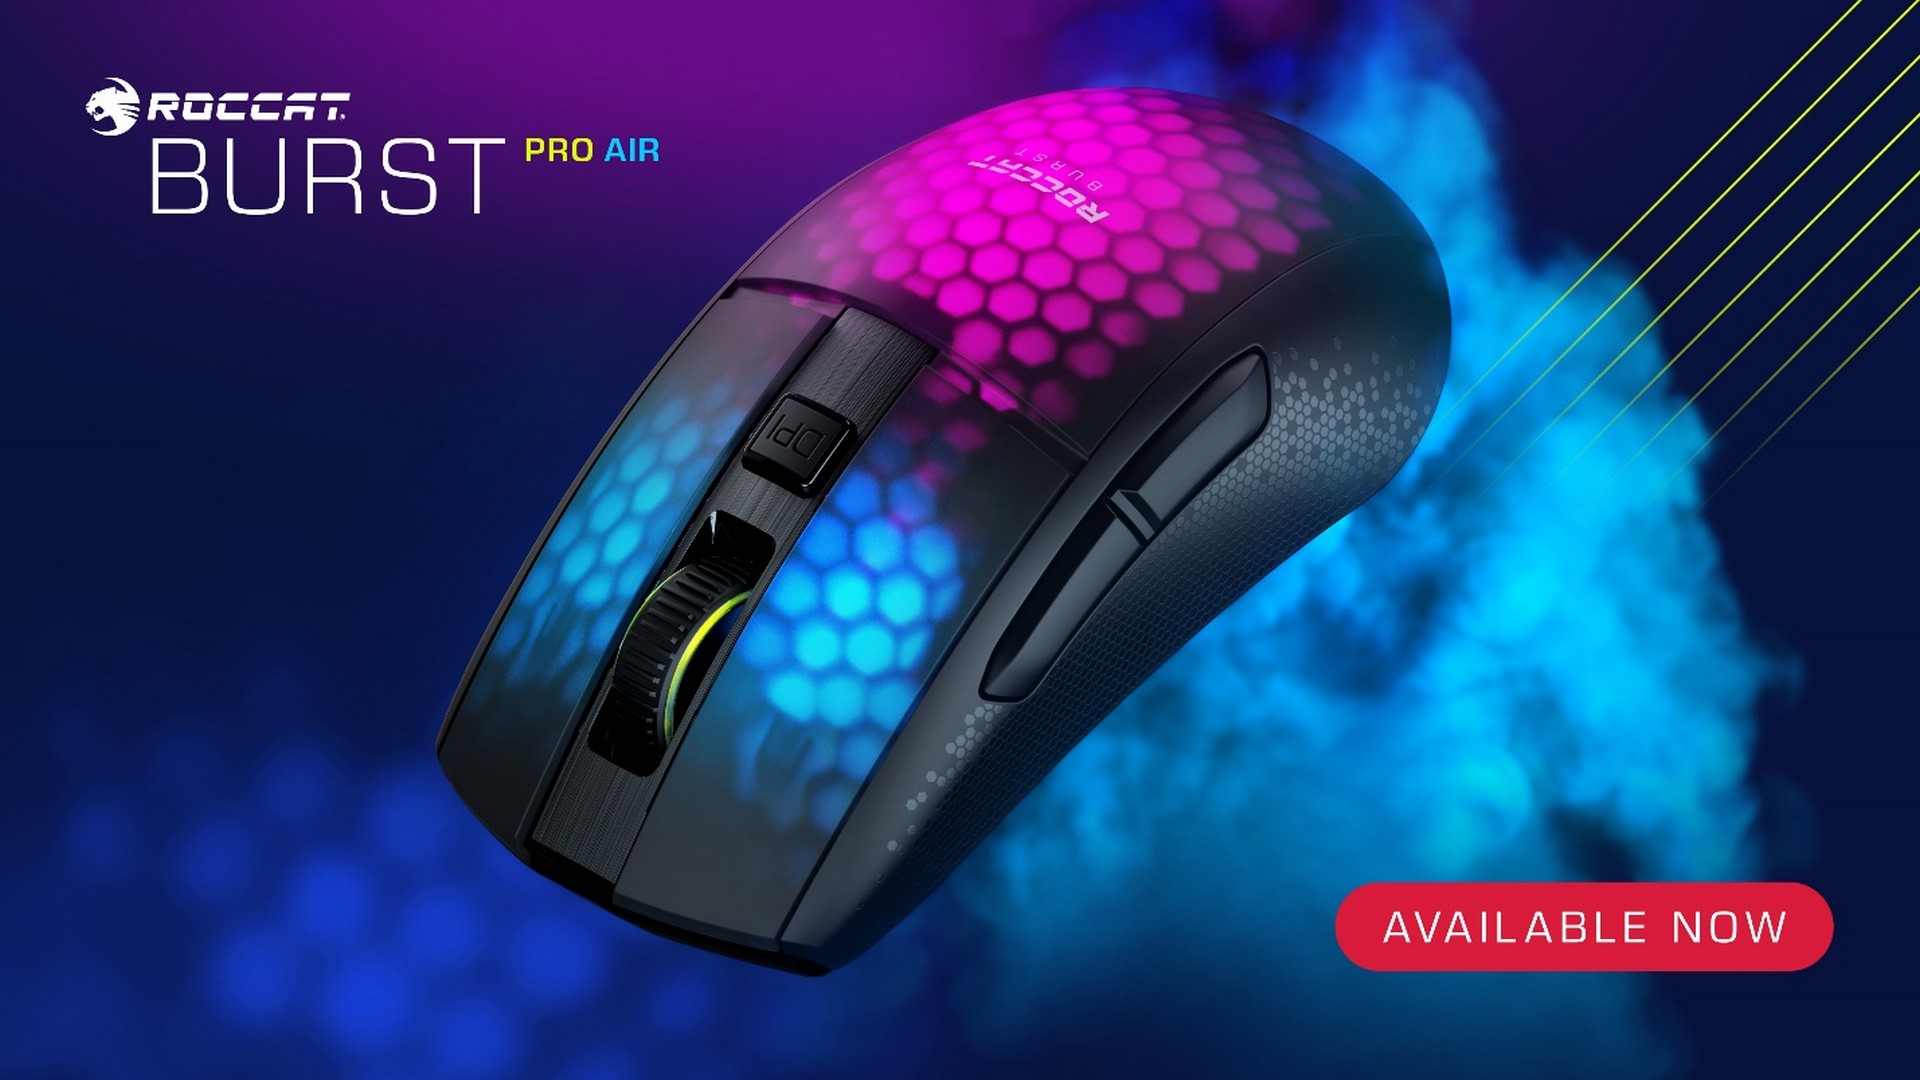 ROCCAT’s New Wireless Burst Pro Air PC Gaming Mouse Is Now Available In Australia